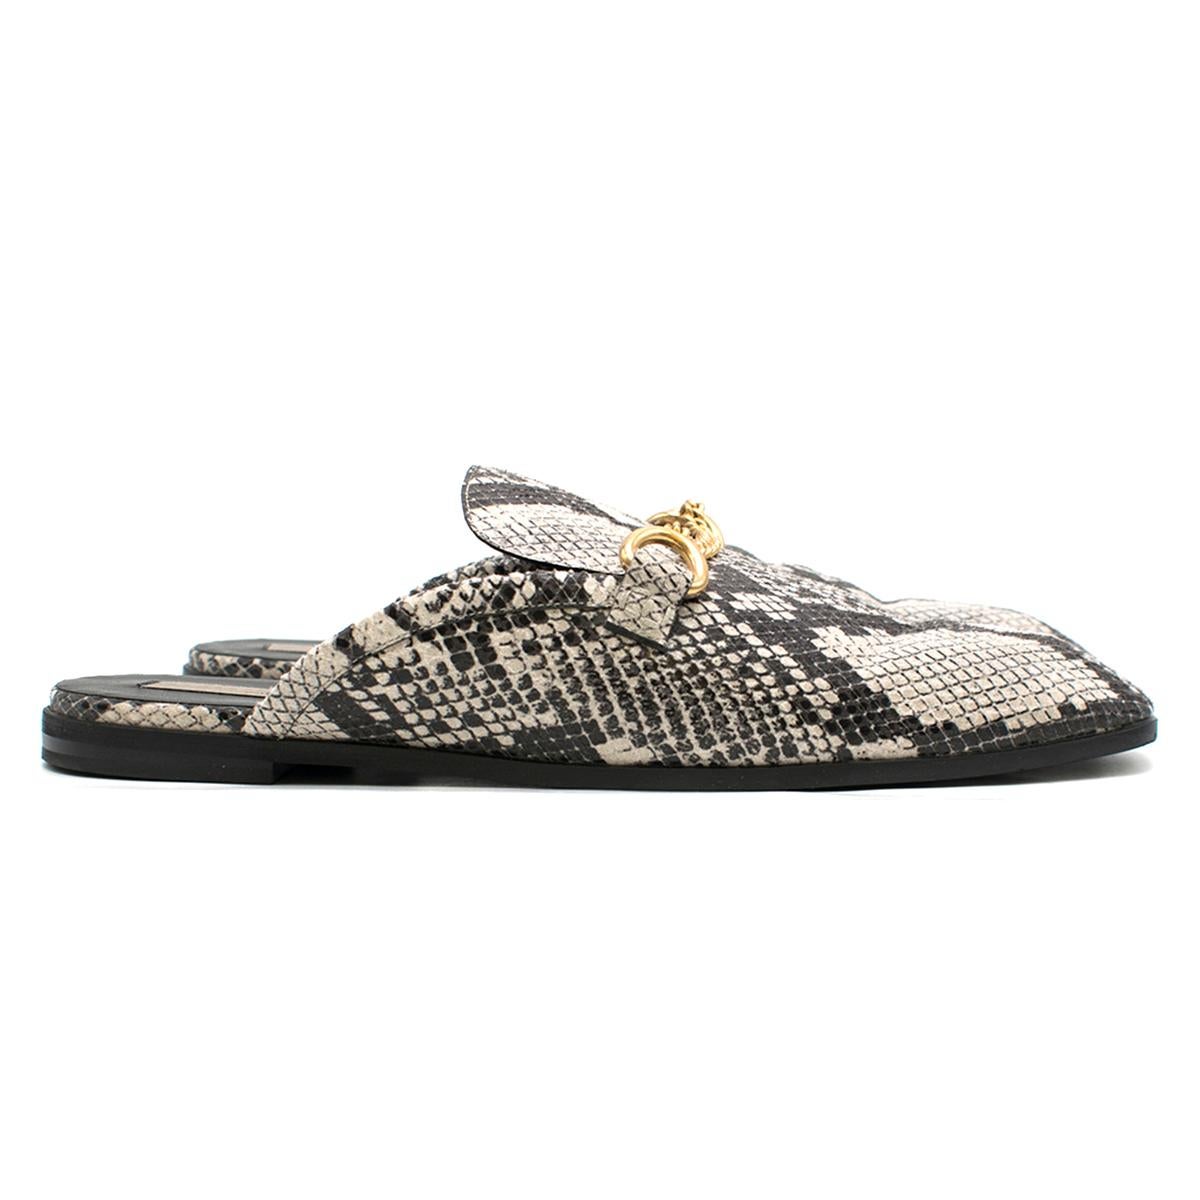 Stella McCartney Python-Effect Faux-Leather Backless Loafers

- Faux-leather Loafers
- Python-effect
- Backless style, slip on
- Gold toned hardware, ring and chain embellishment 
- Black sole

This item comes with an additional dust bag. 

Please